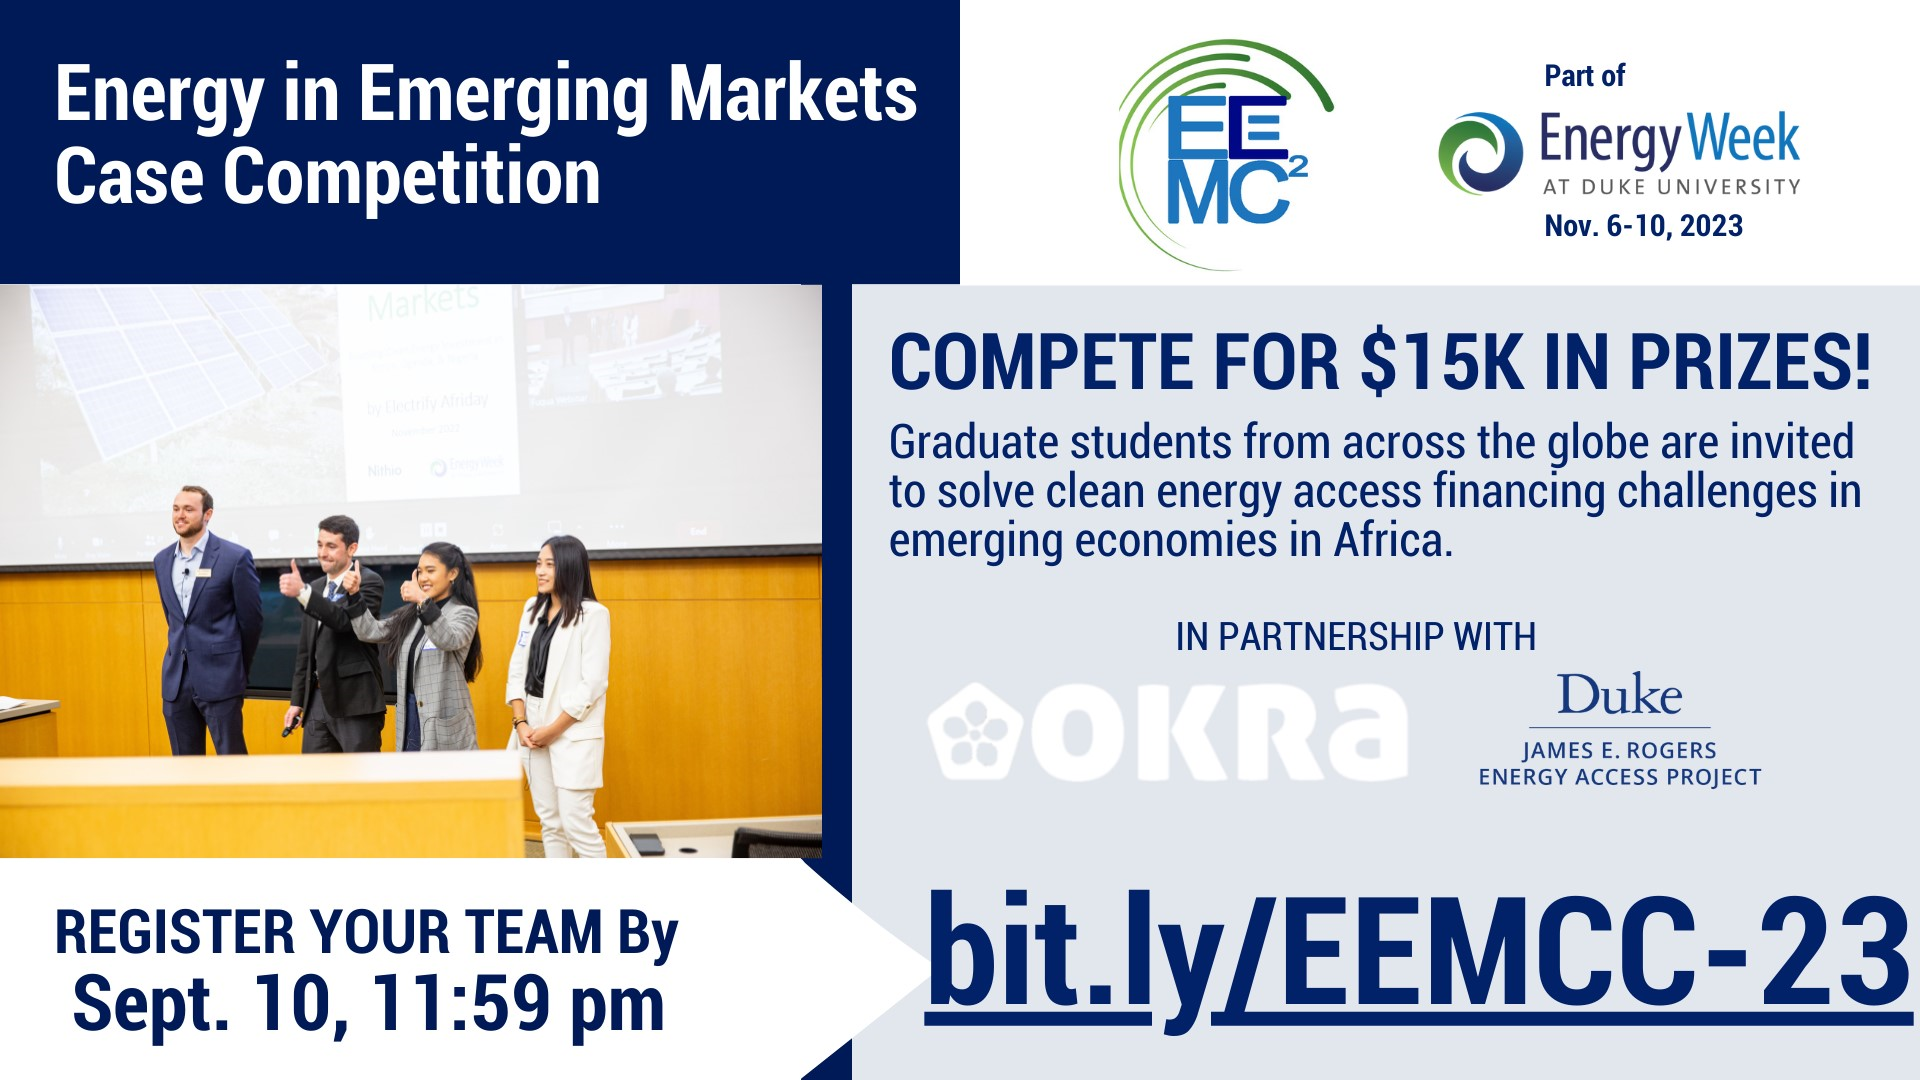 Energy in Emerging Markets Case Competition 2023